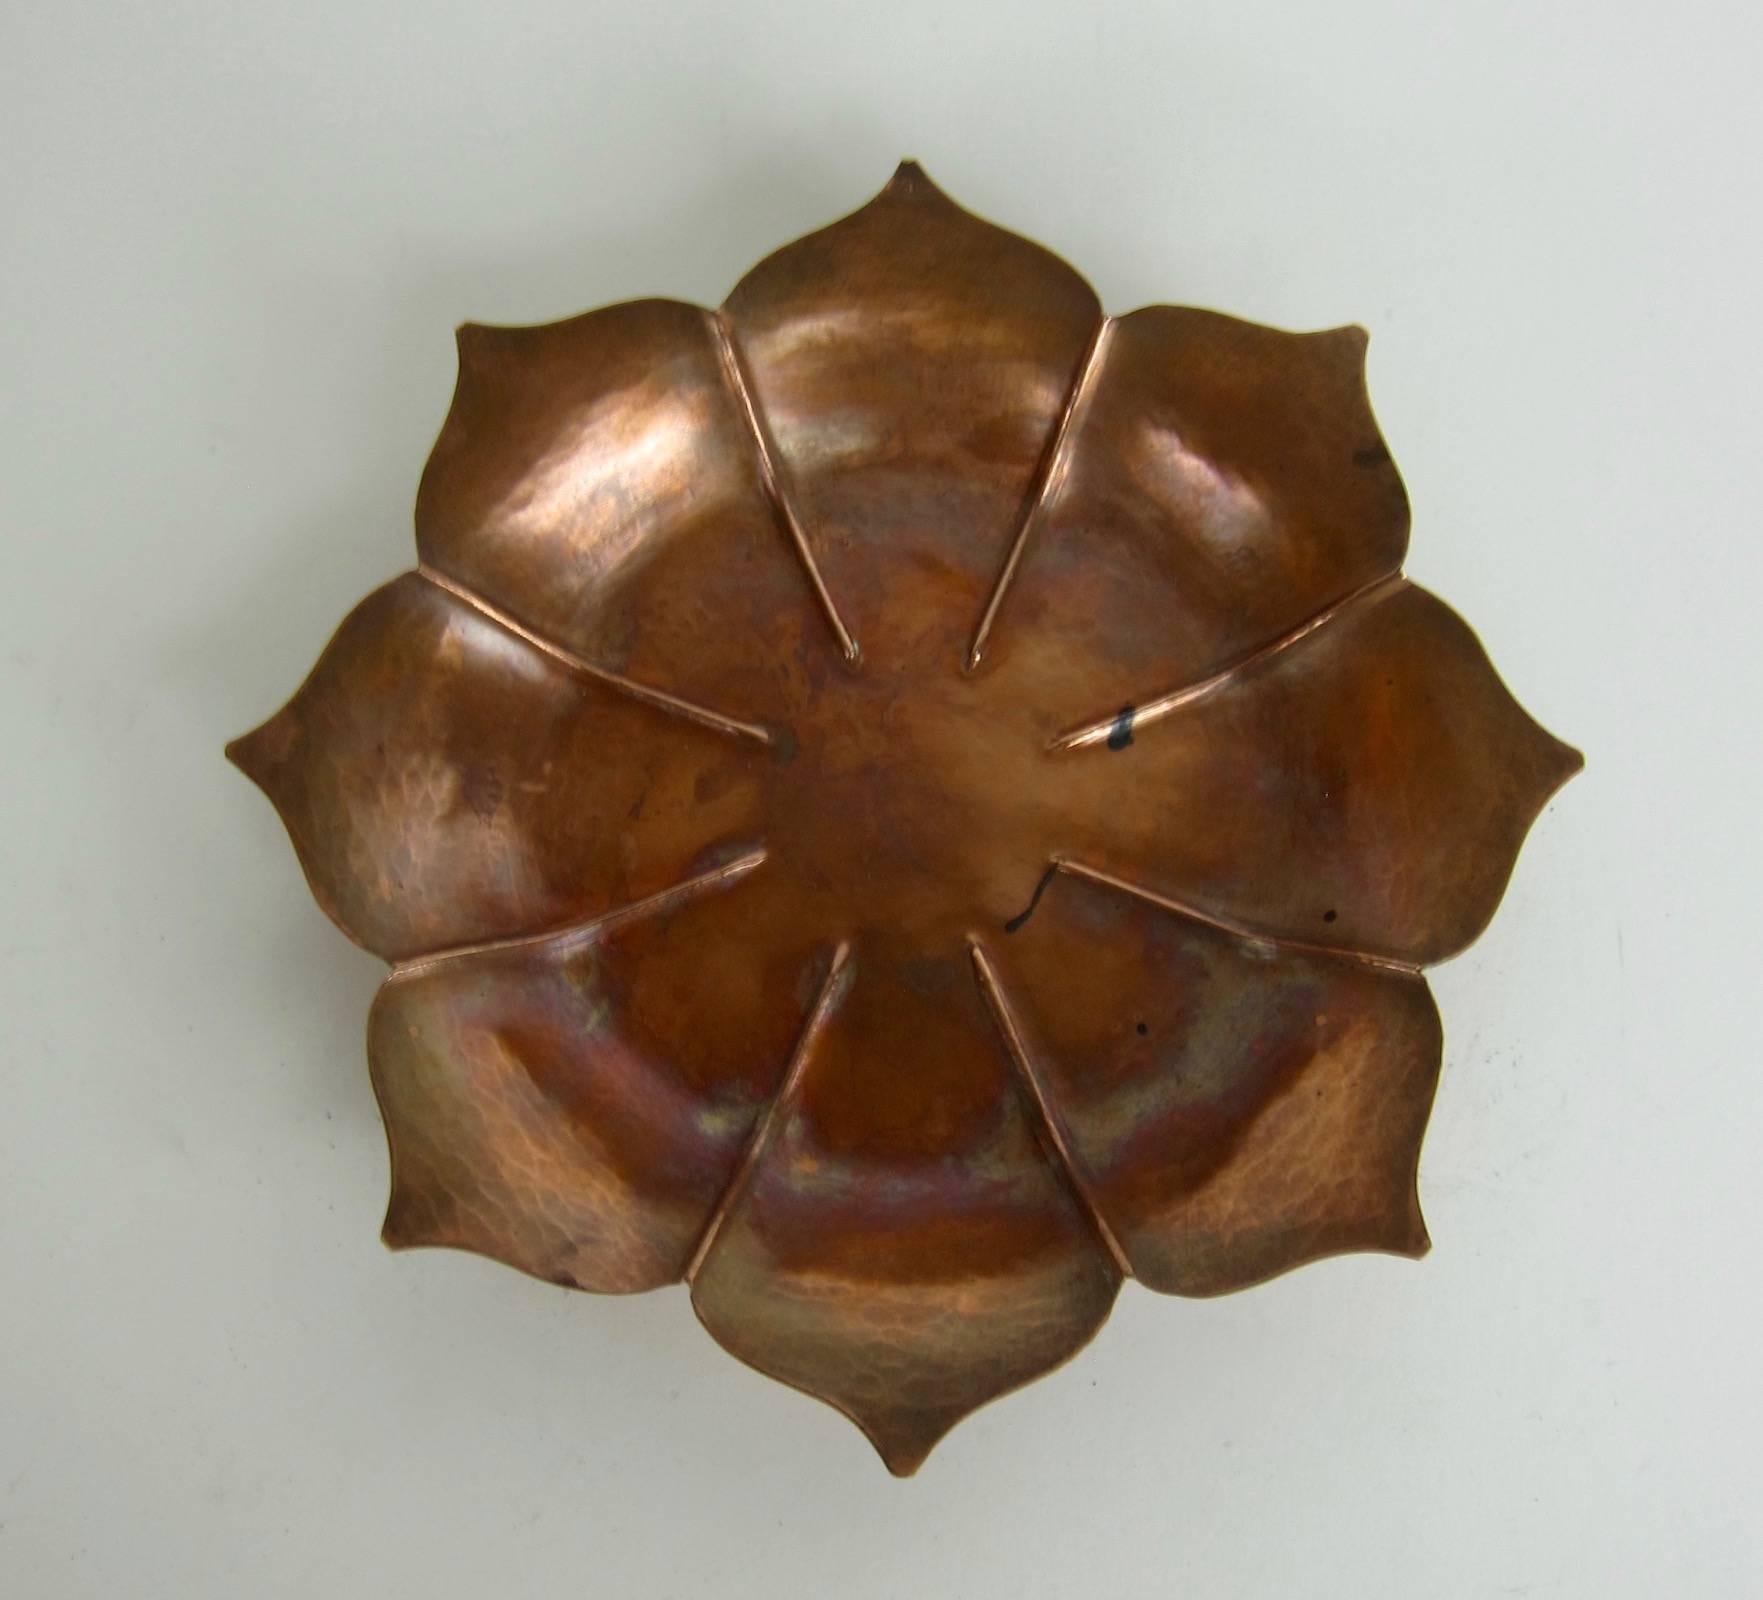 An American Arts and Crafts era fluted and flaring lotus form dish or shallow bowl hand-crafted by Marie Zimmermann (1879-1972). The piece comes directly from this American metalworker's estate and dates circa 1920.

The design is a simple and